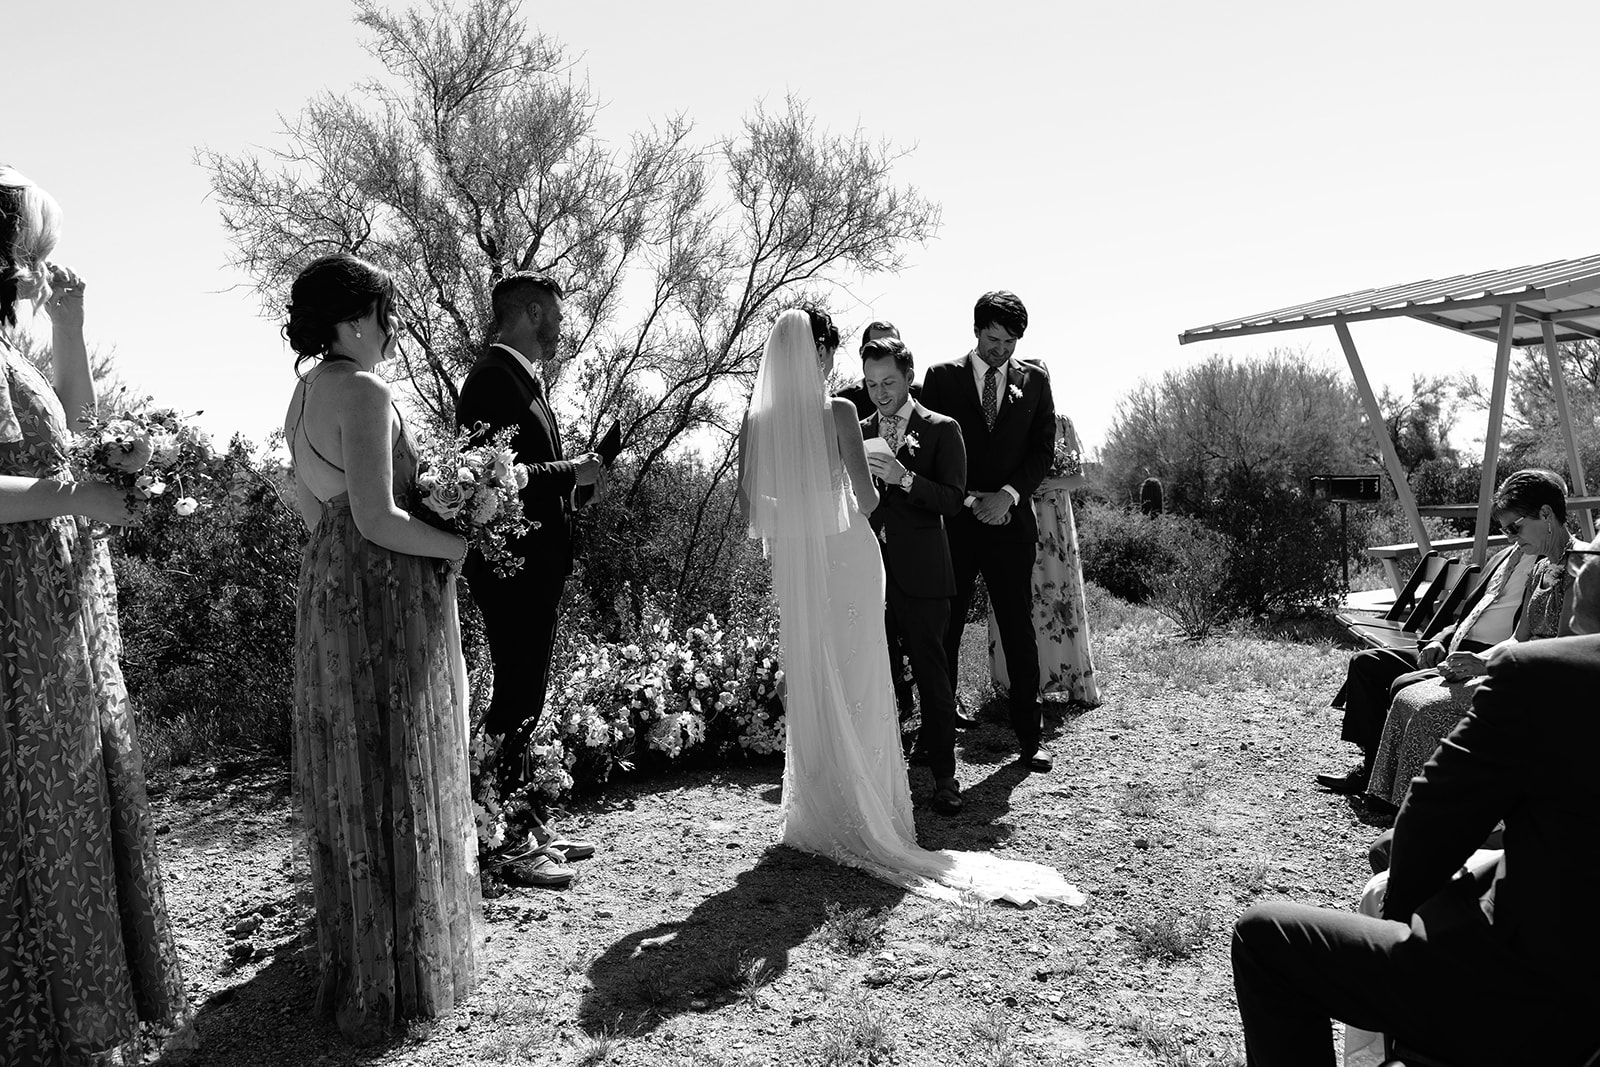 A bride in a white dress and veil holding a bouquet walks down the aisle with a man in a dark suit and glasses under a clear blue sky at a a garden party wedding